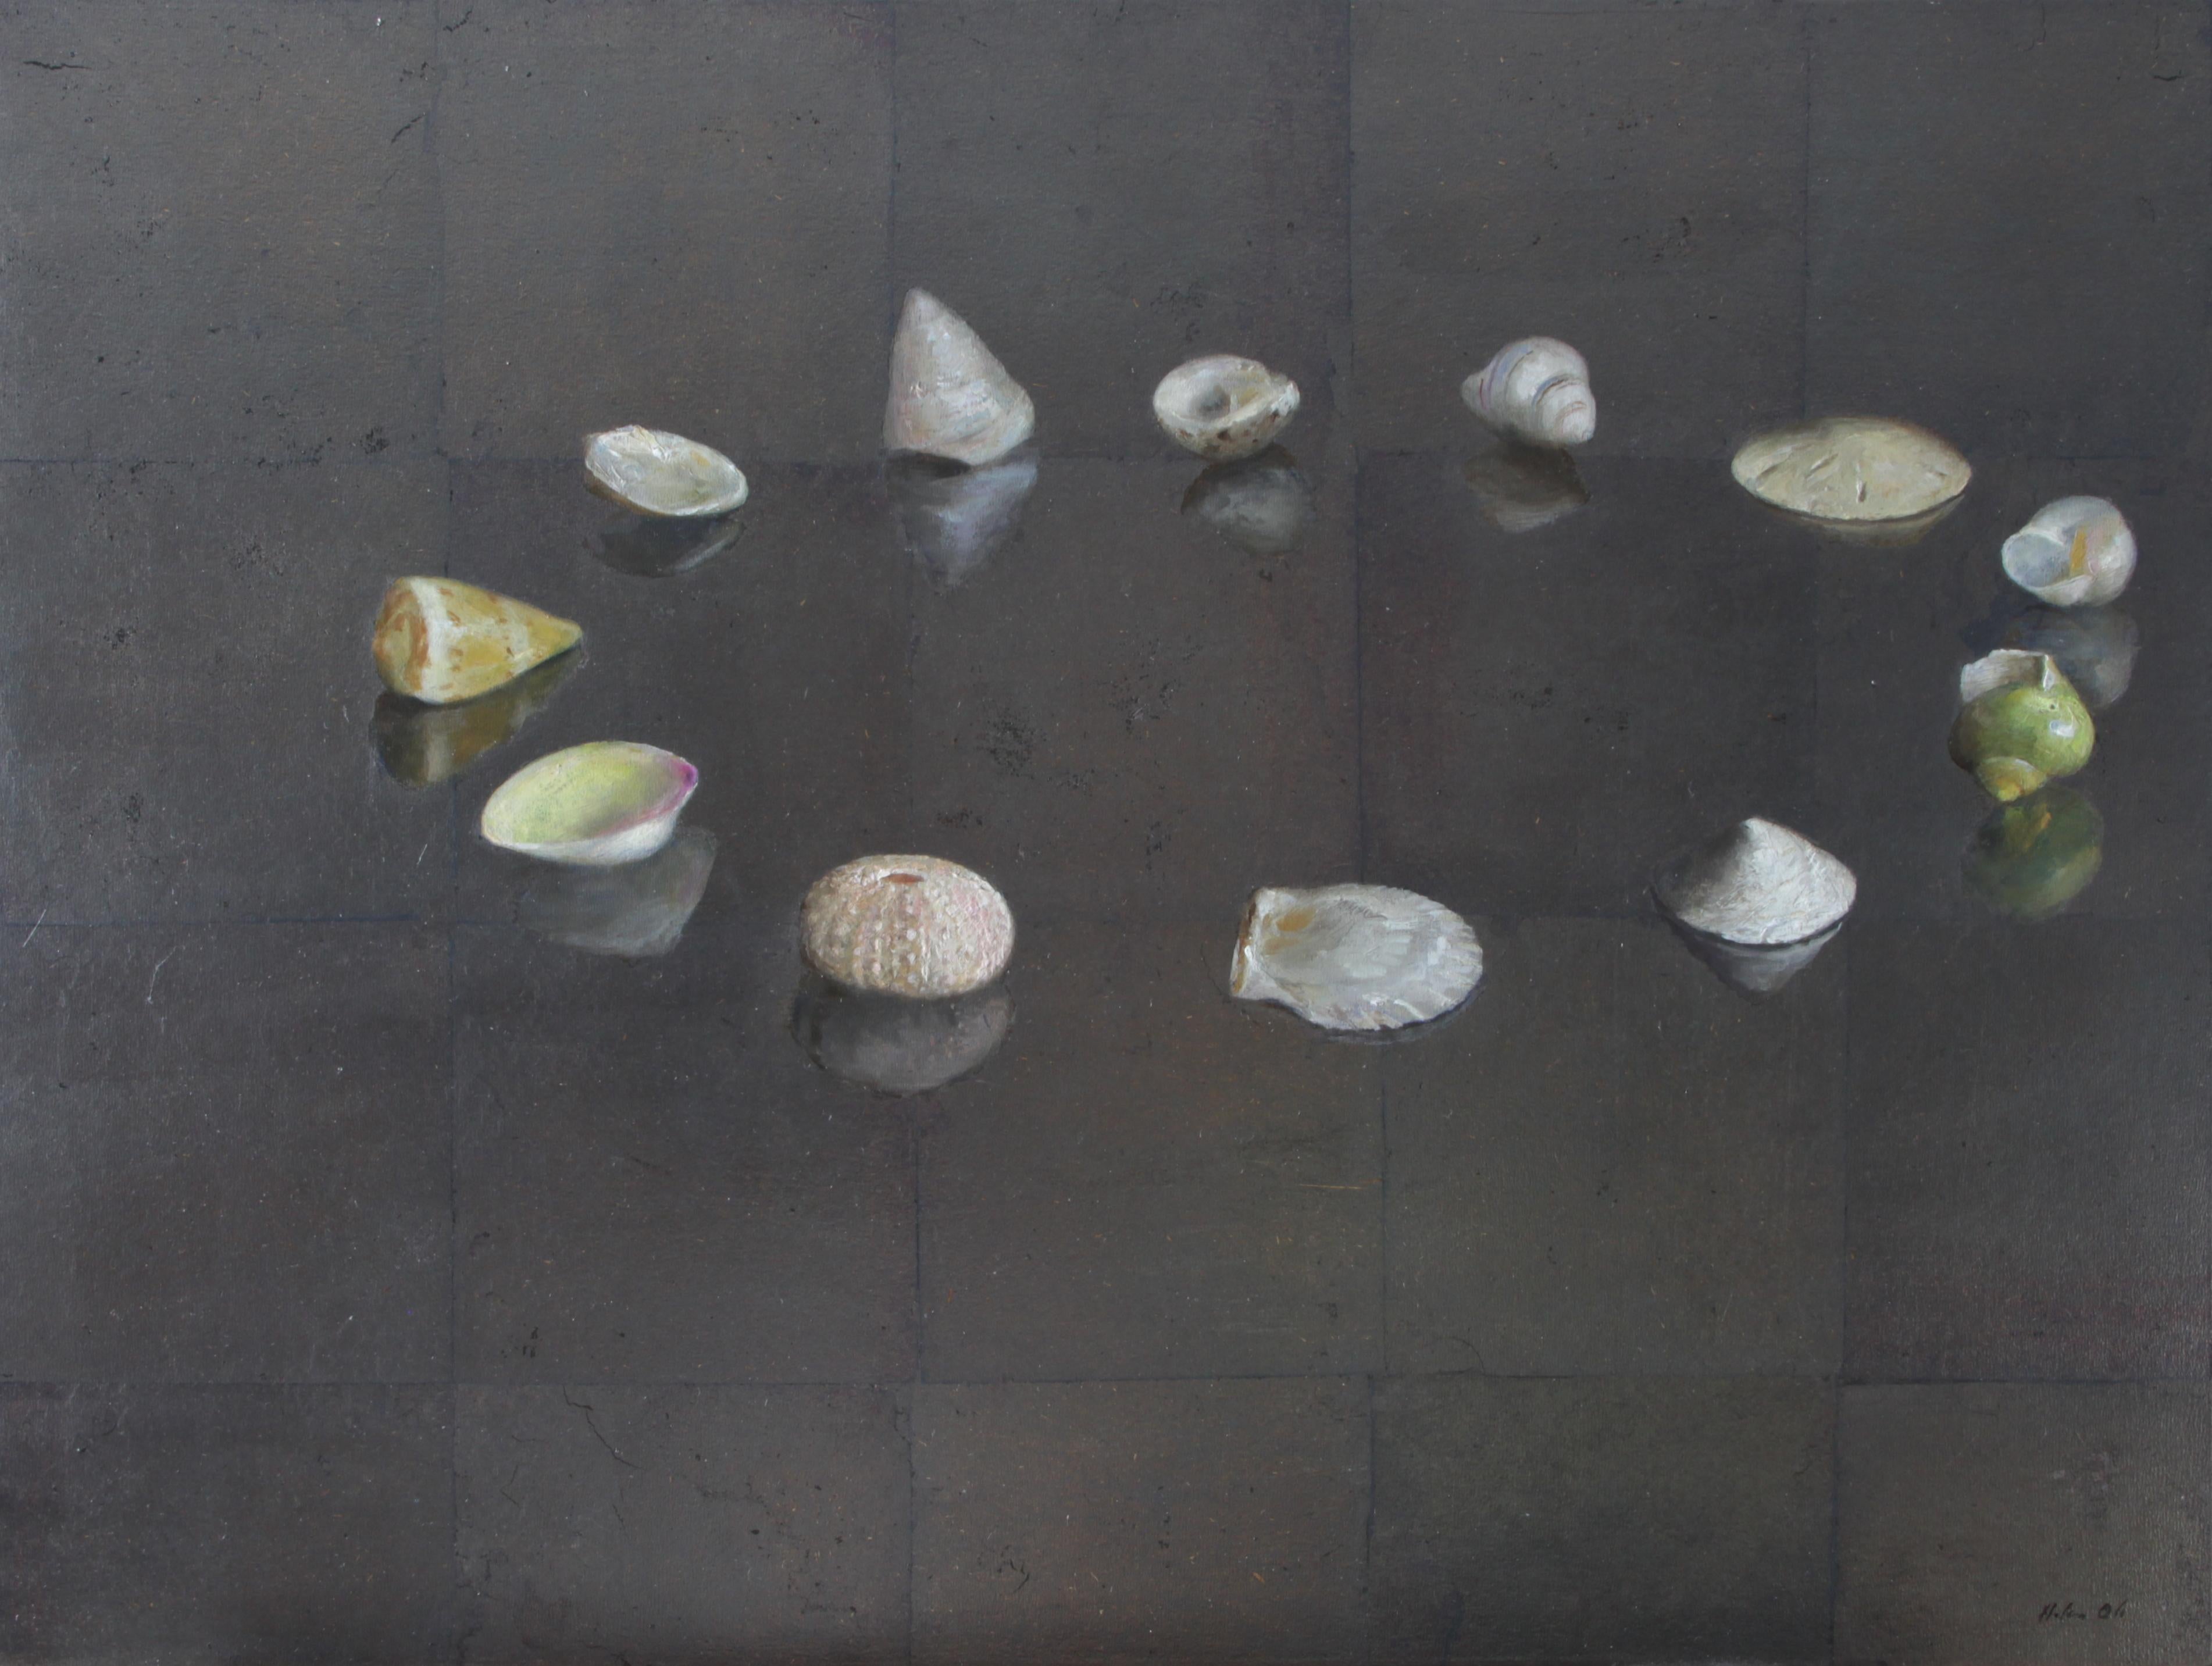 Helen Oh Animal Painting - Circle of Shells - Original Oil Painting on Silver Leaf, Sea Shell Arrangement